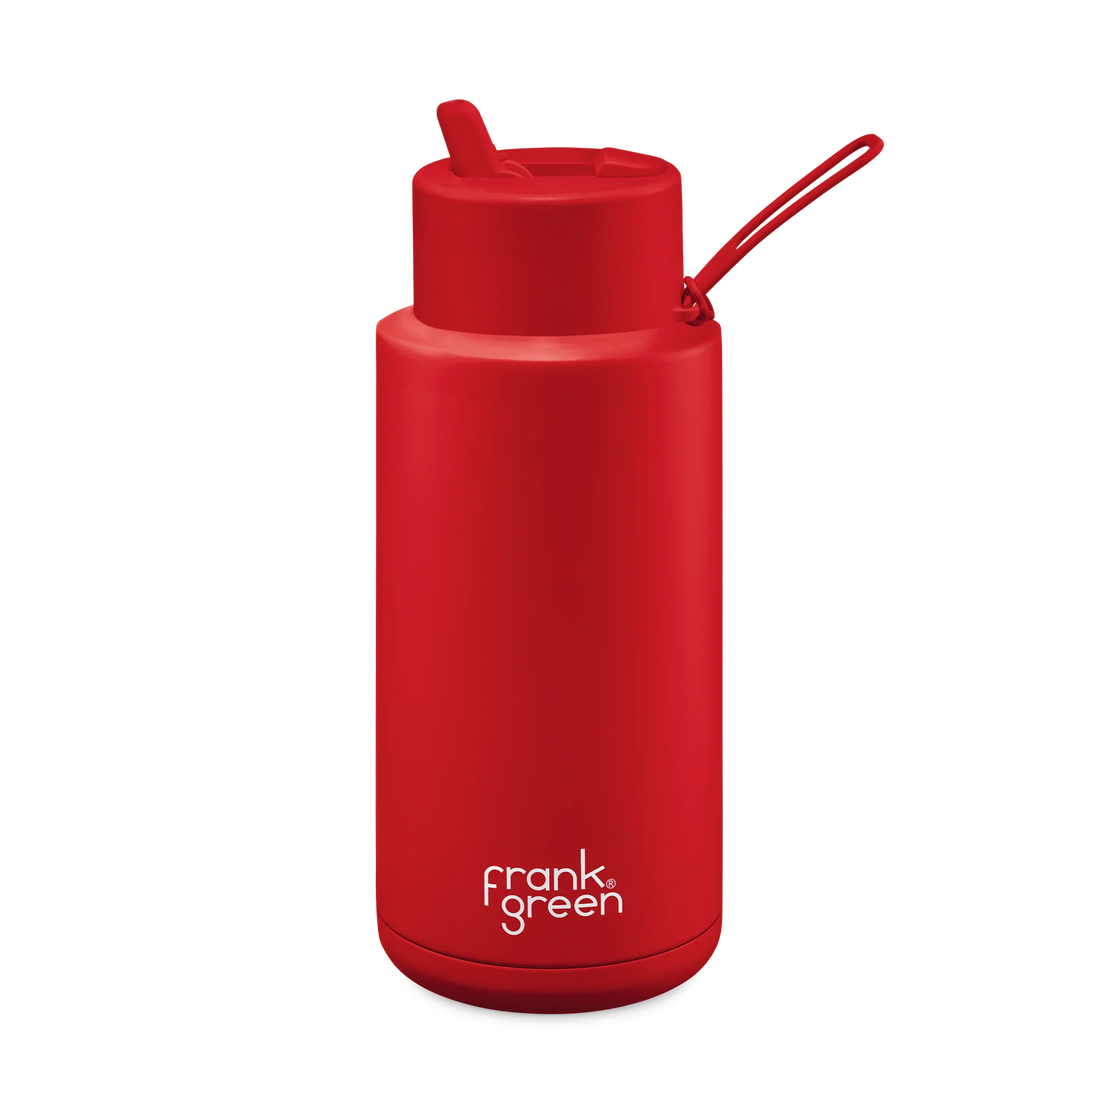 Frank Green Stainless Steel Ceramic Reusable Bottle Atomic Red With Straw And Strap 34oz/1,000ml